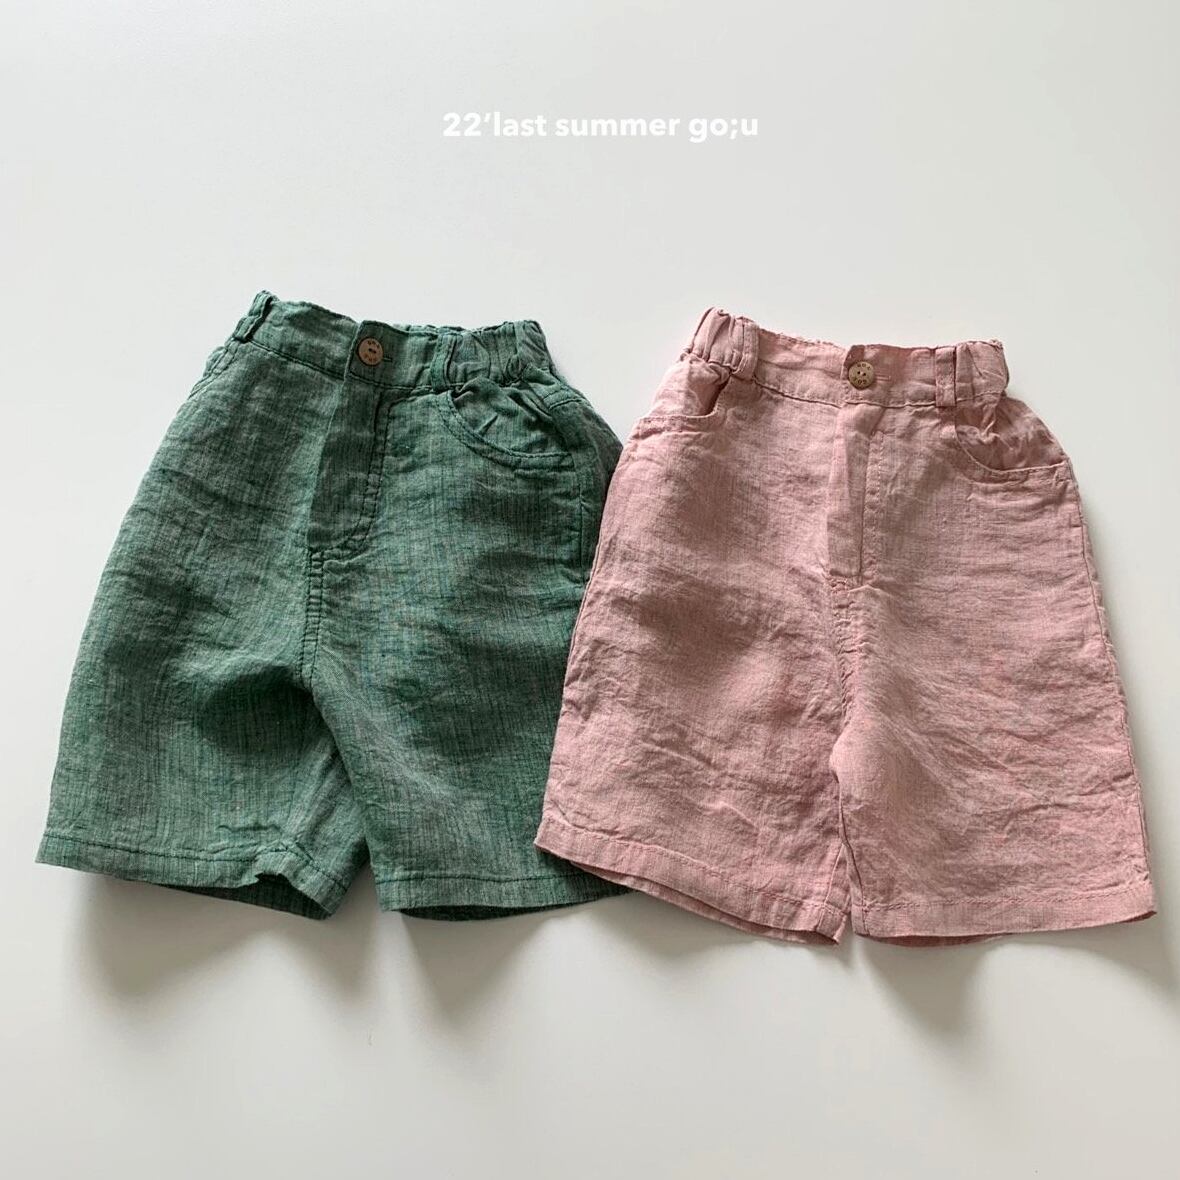 «sold out»«ジュニアあり» go.u リネンショートパンツ 2colors